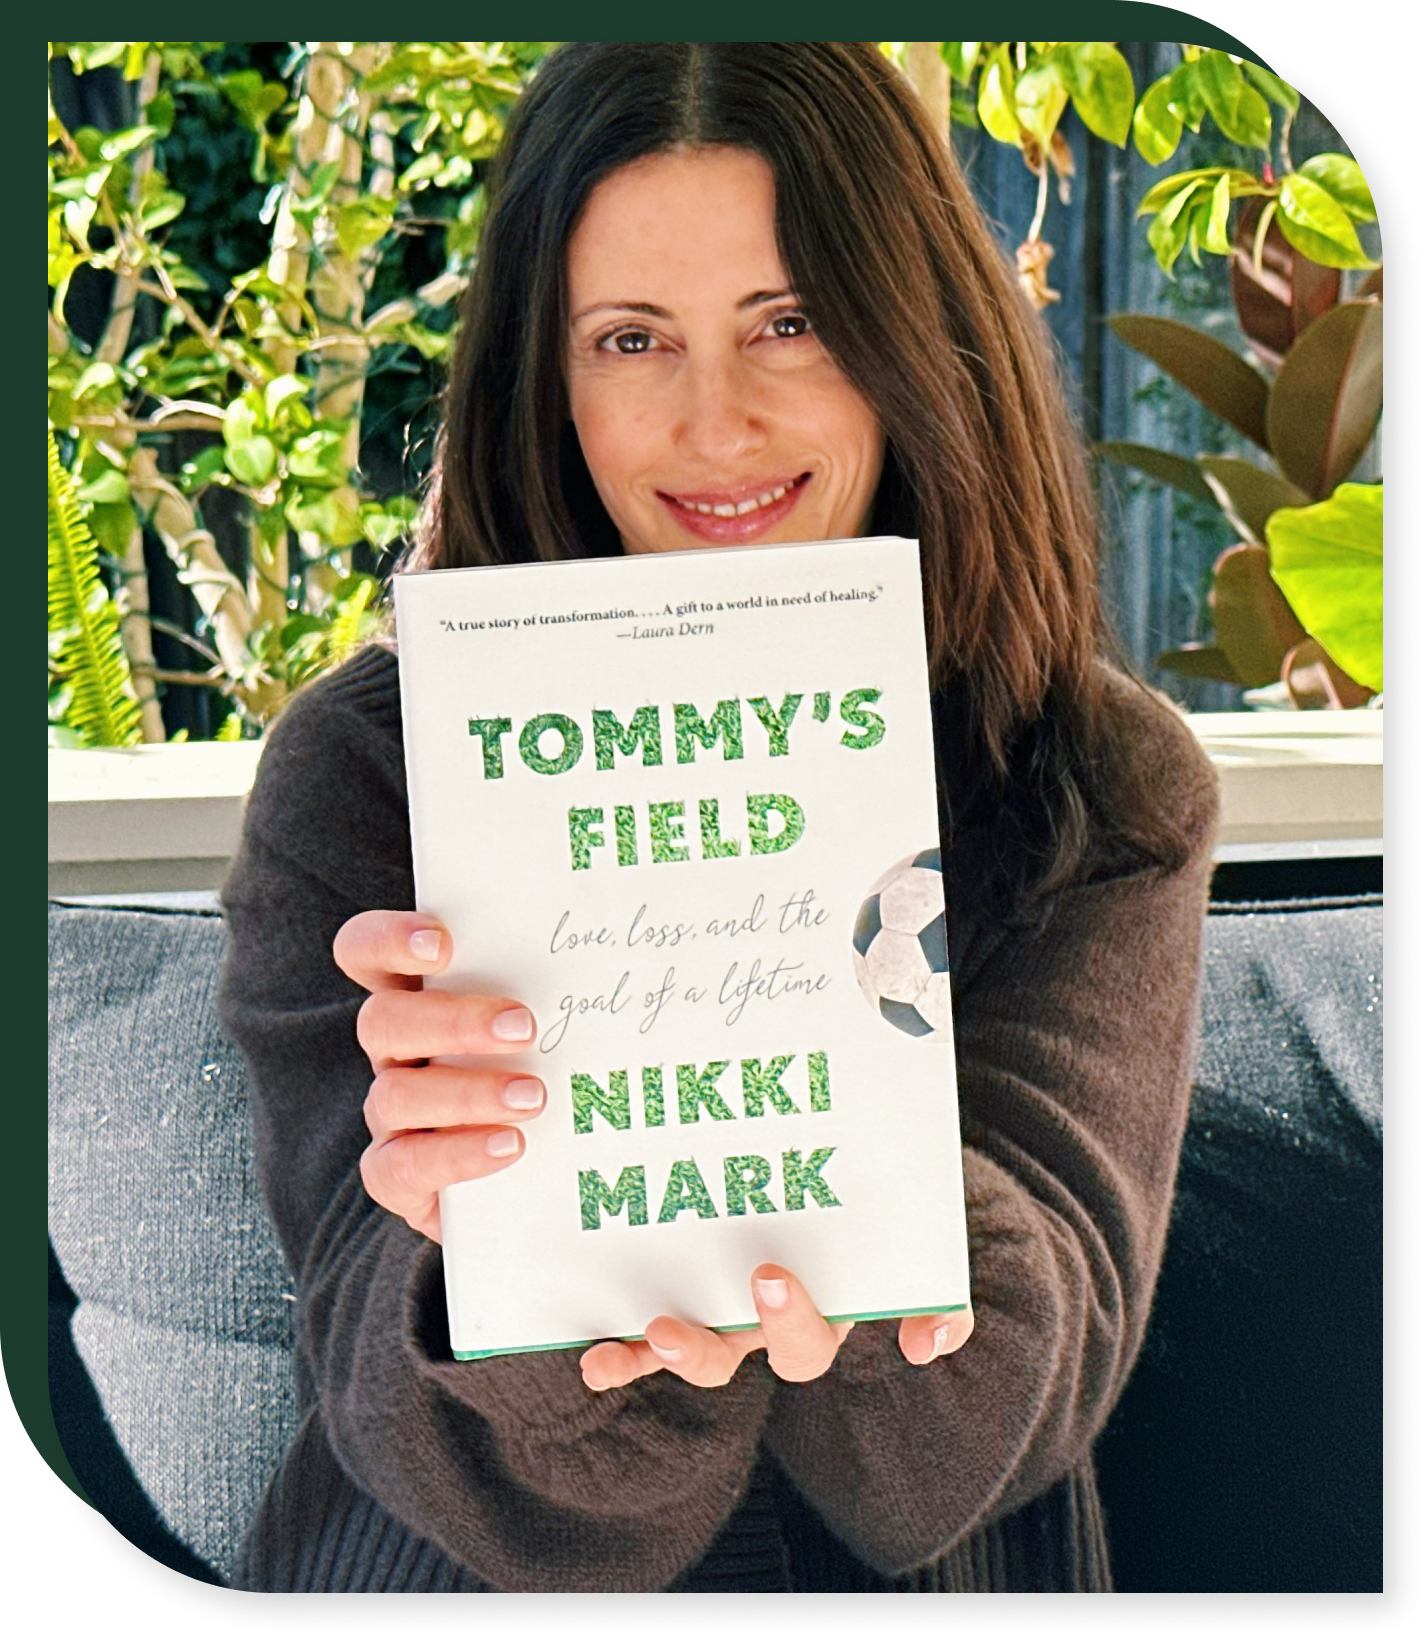 Woman holding a book titled "Tommy's Field